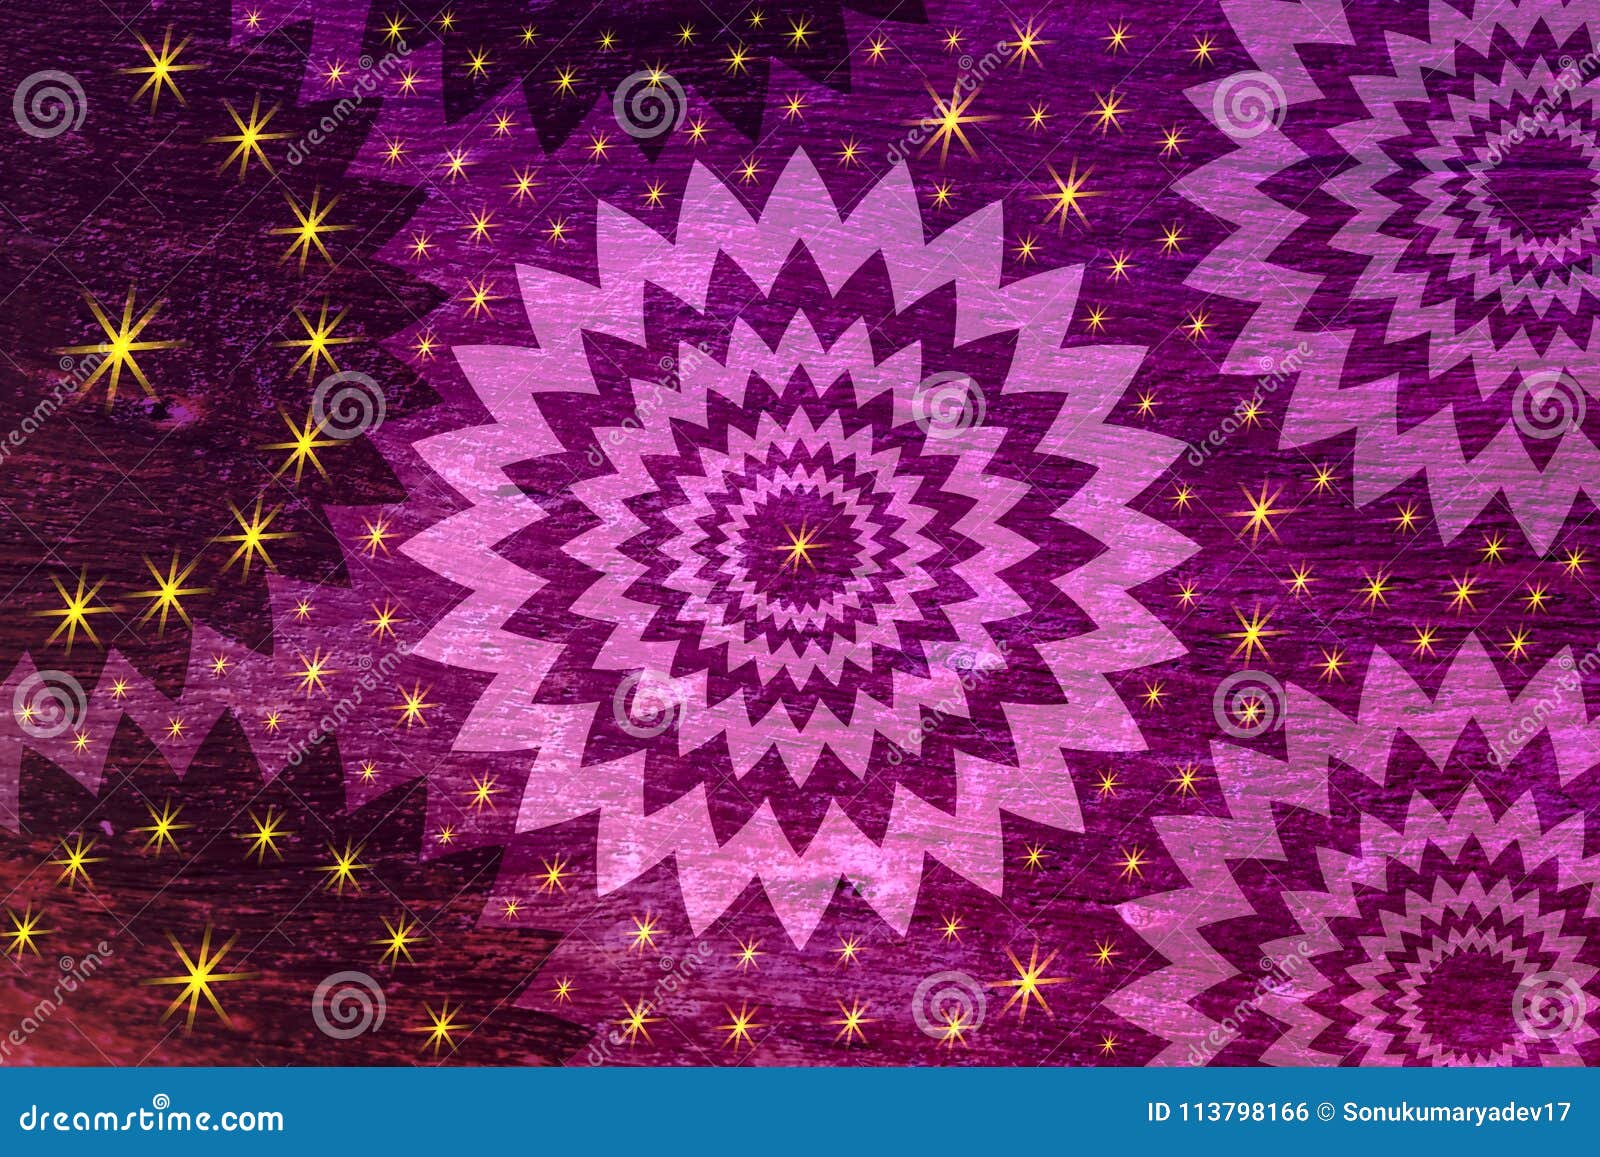 Violet Texture And Star Abstract Background Temped Stock Vector